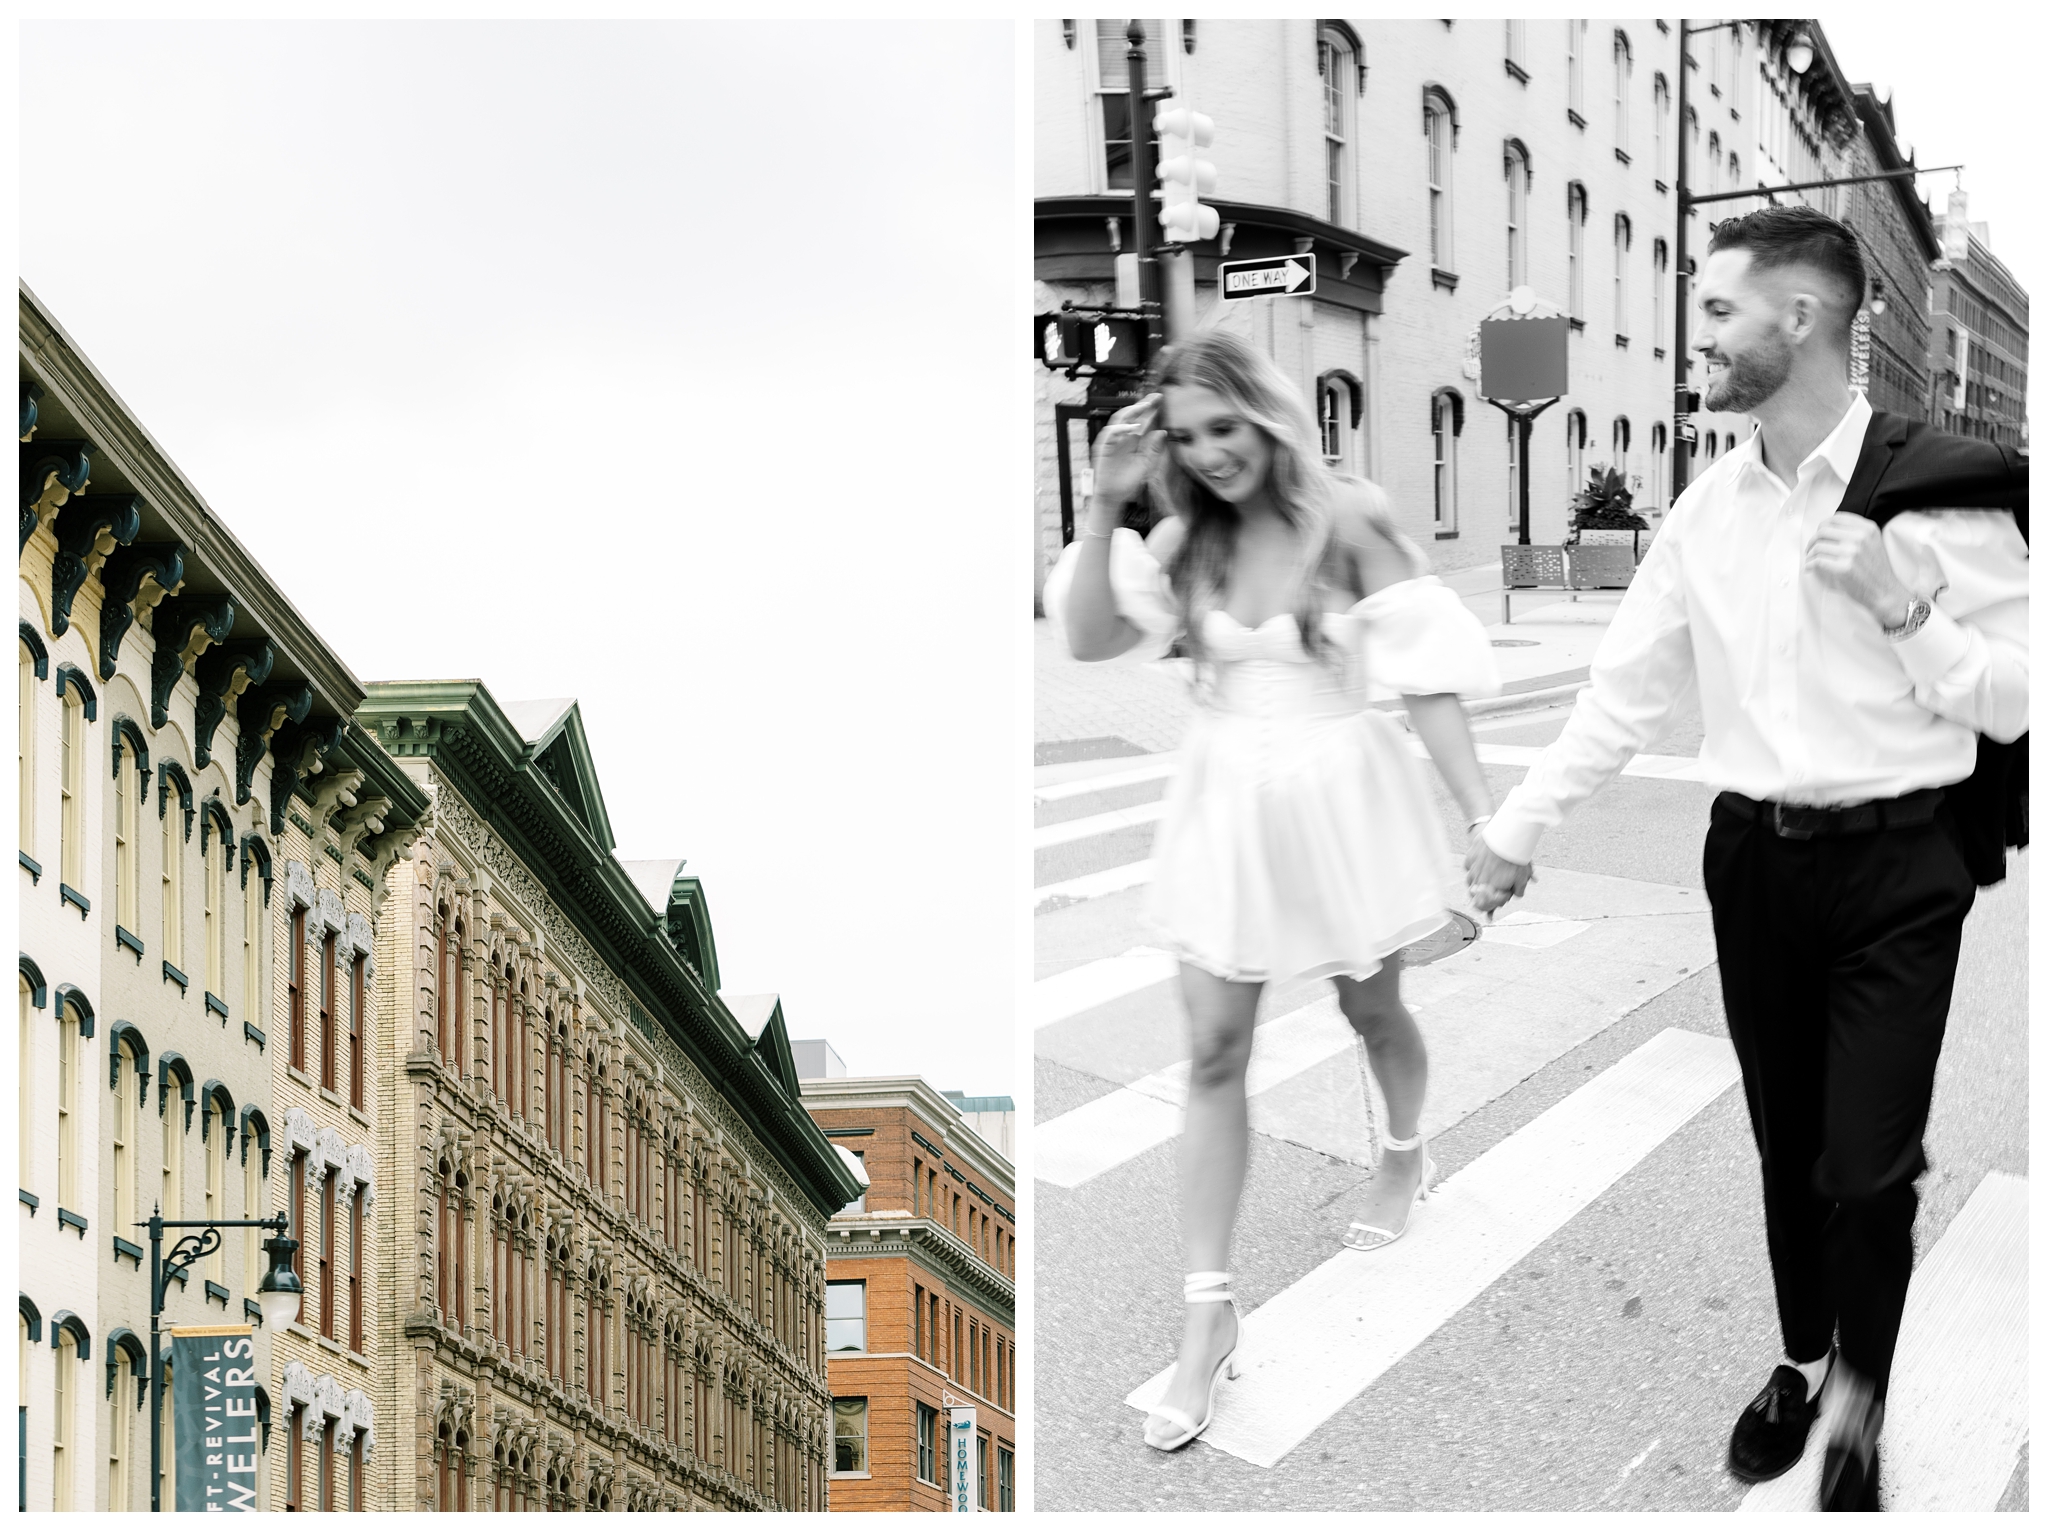 beautiful romantic downtown and bar engagement shoot in grand rapids by josh and andrea photography with a champagne pop